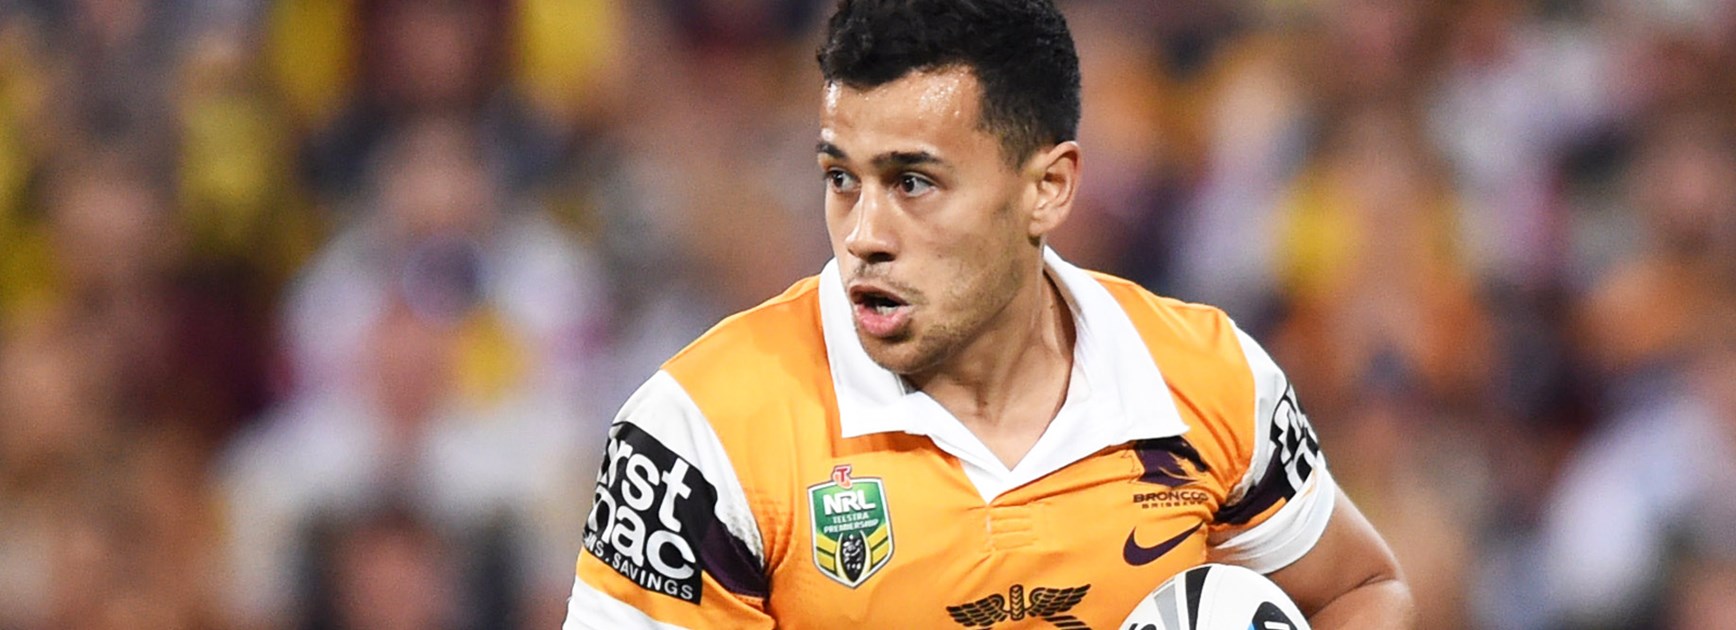 A breakout NRL season with Brisbane has earned Jordan Kahu a call-up to the New Zealand Test squad.